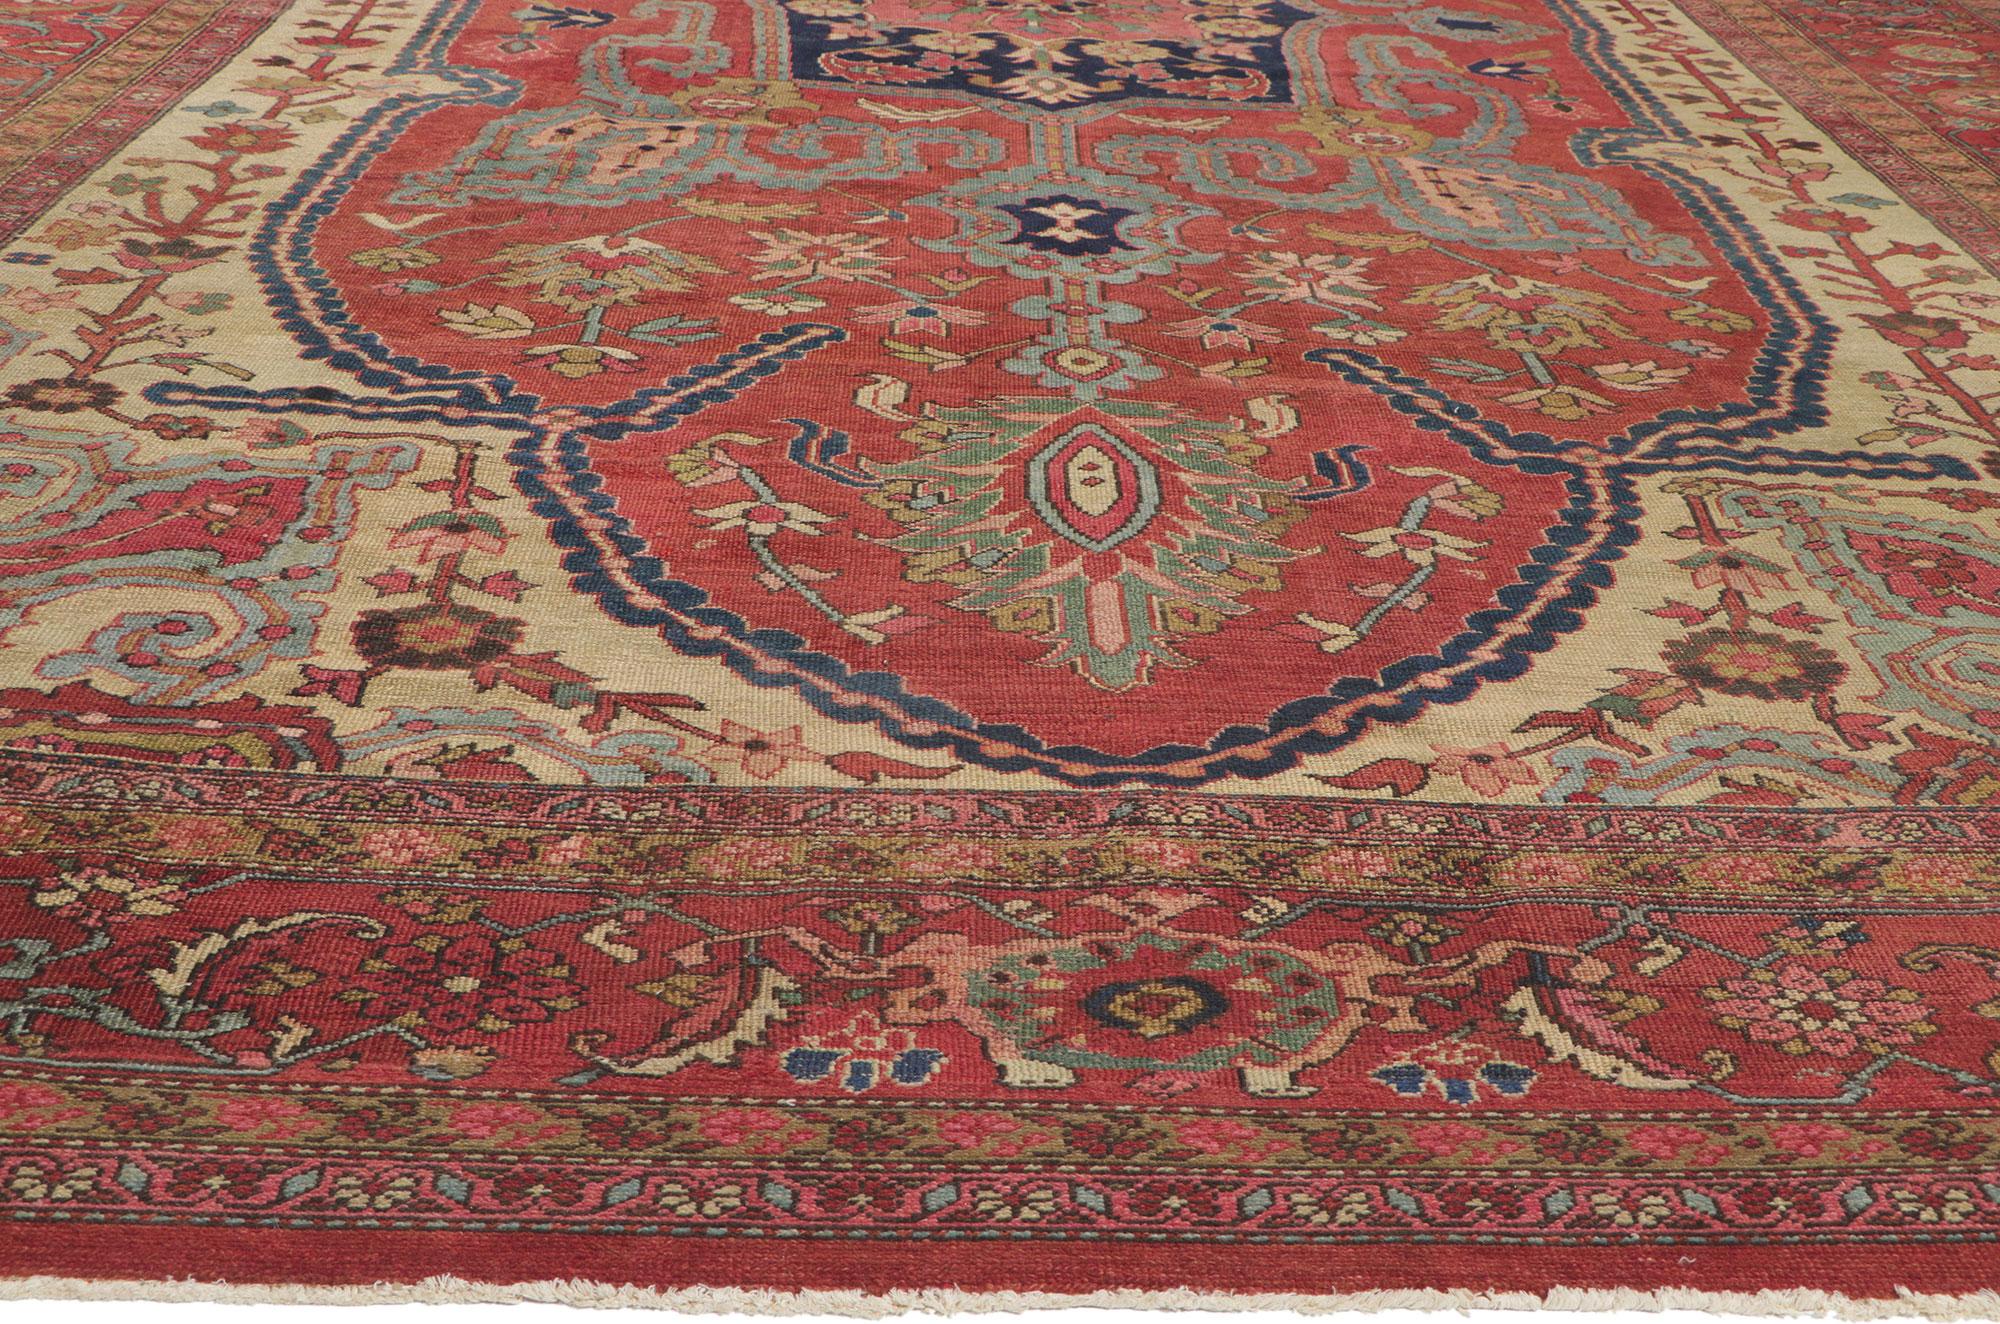 Oversized Antique Persian Bakshaish Rug, Timeless Appeal Meets Perpetually Posh In Good Condition For Sale In Dallas, TX